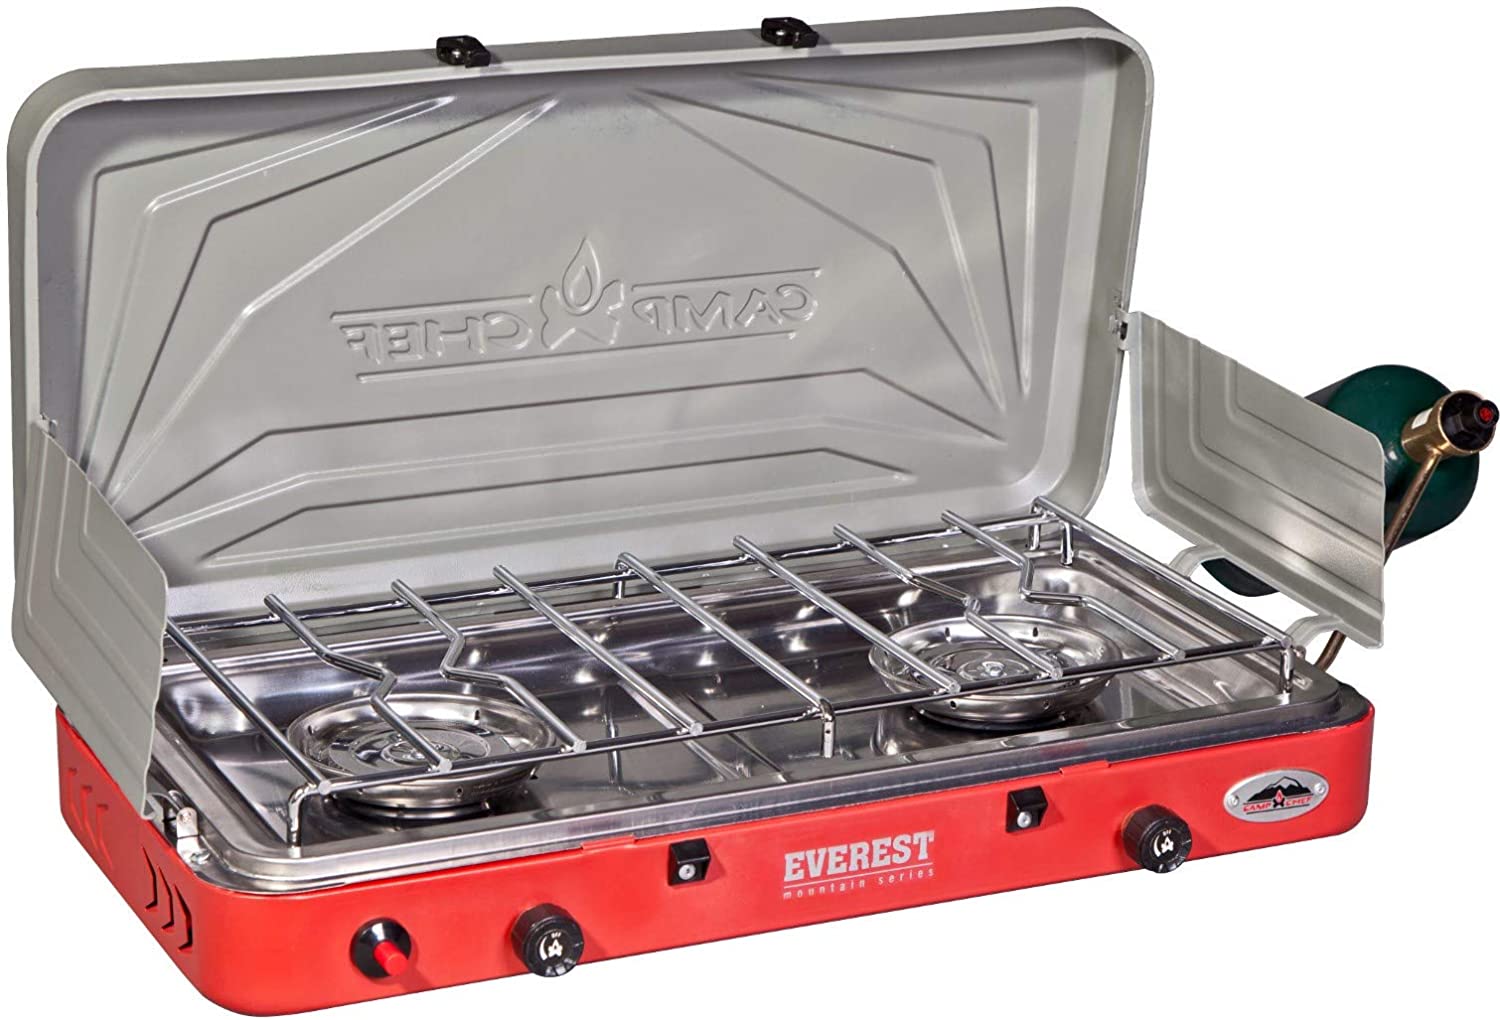 Camp Chef Everest camping stove